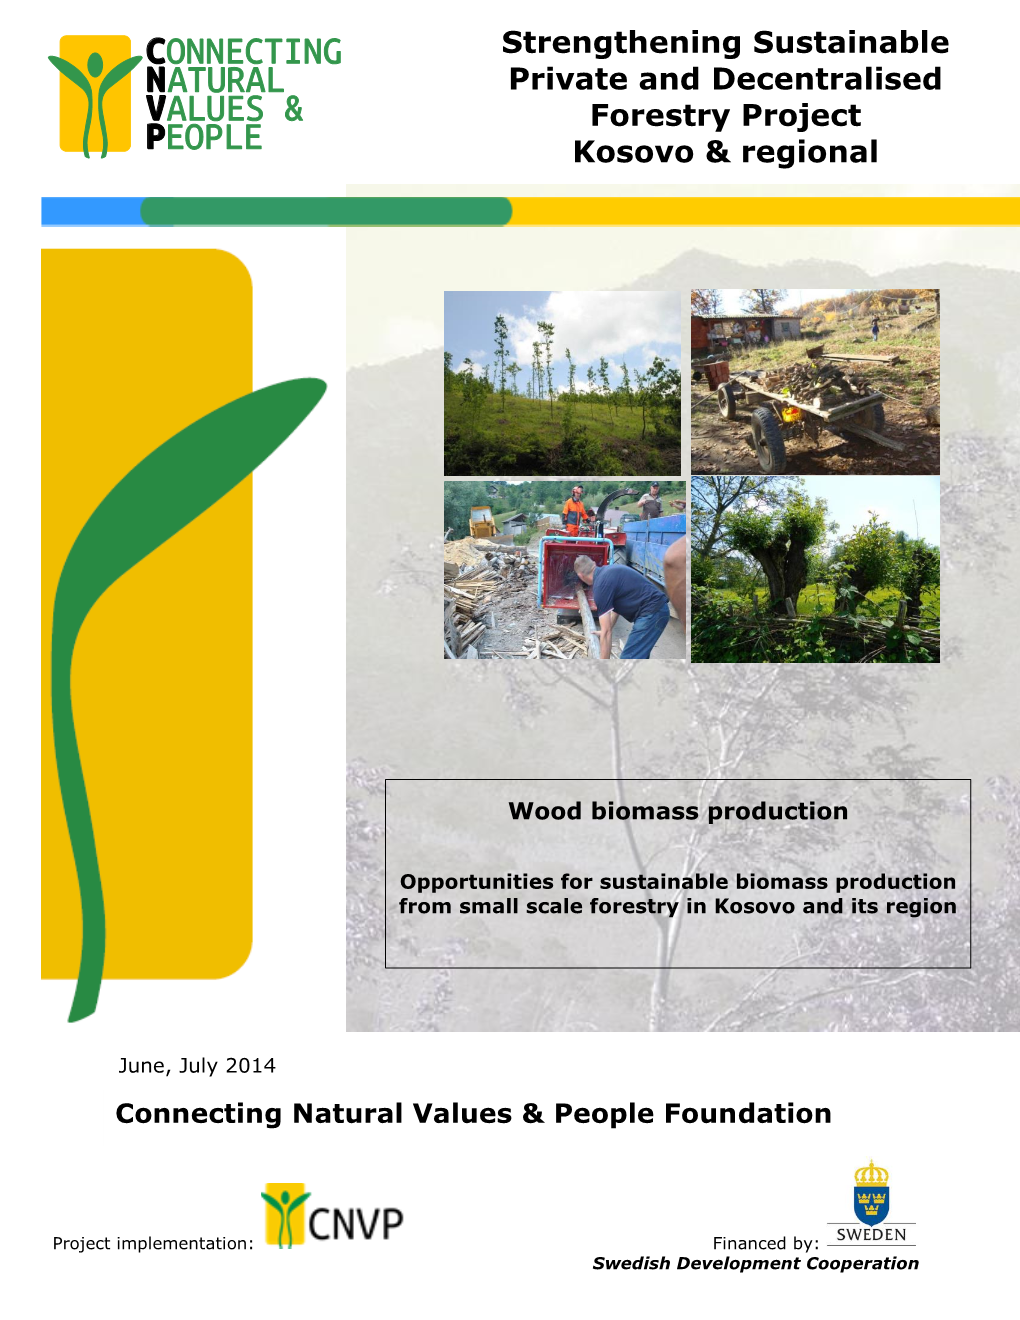 Strengthening Sustainable Private and Decentralised Forestry Project